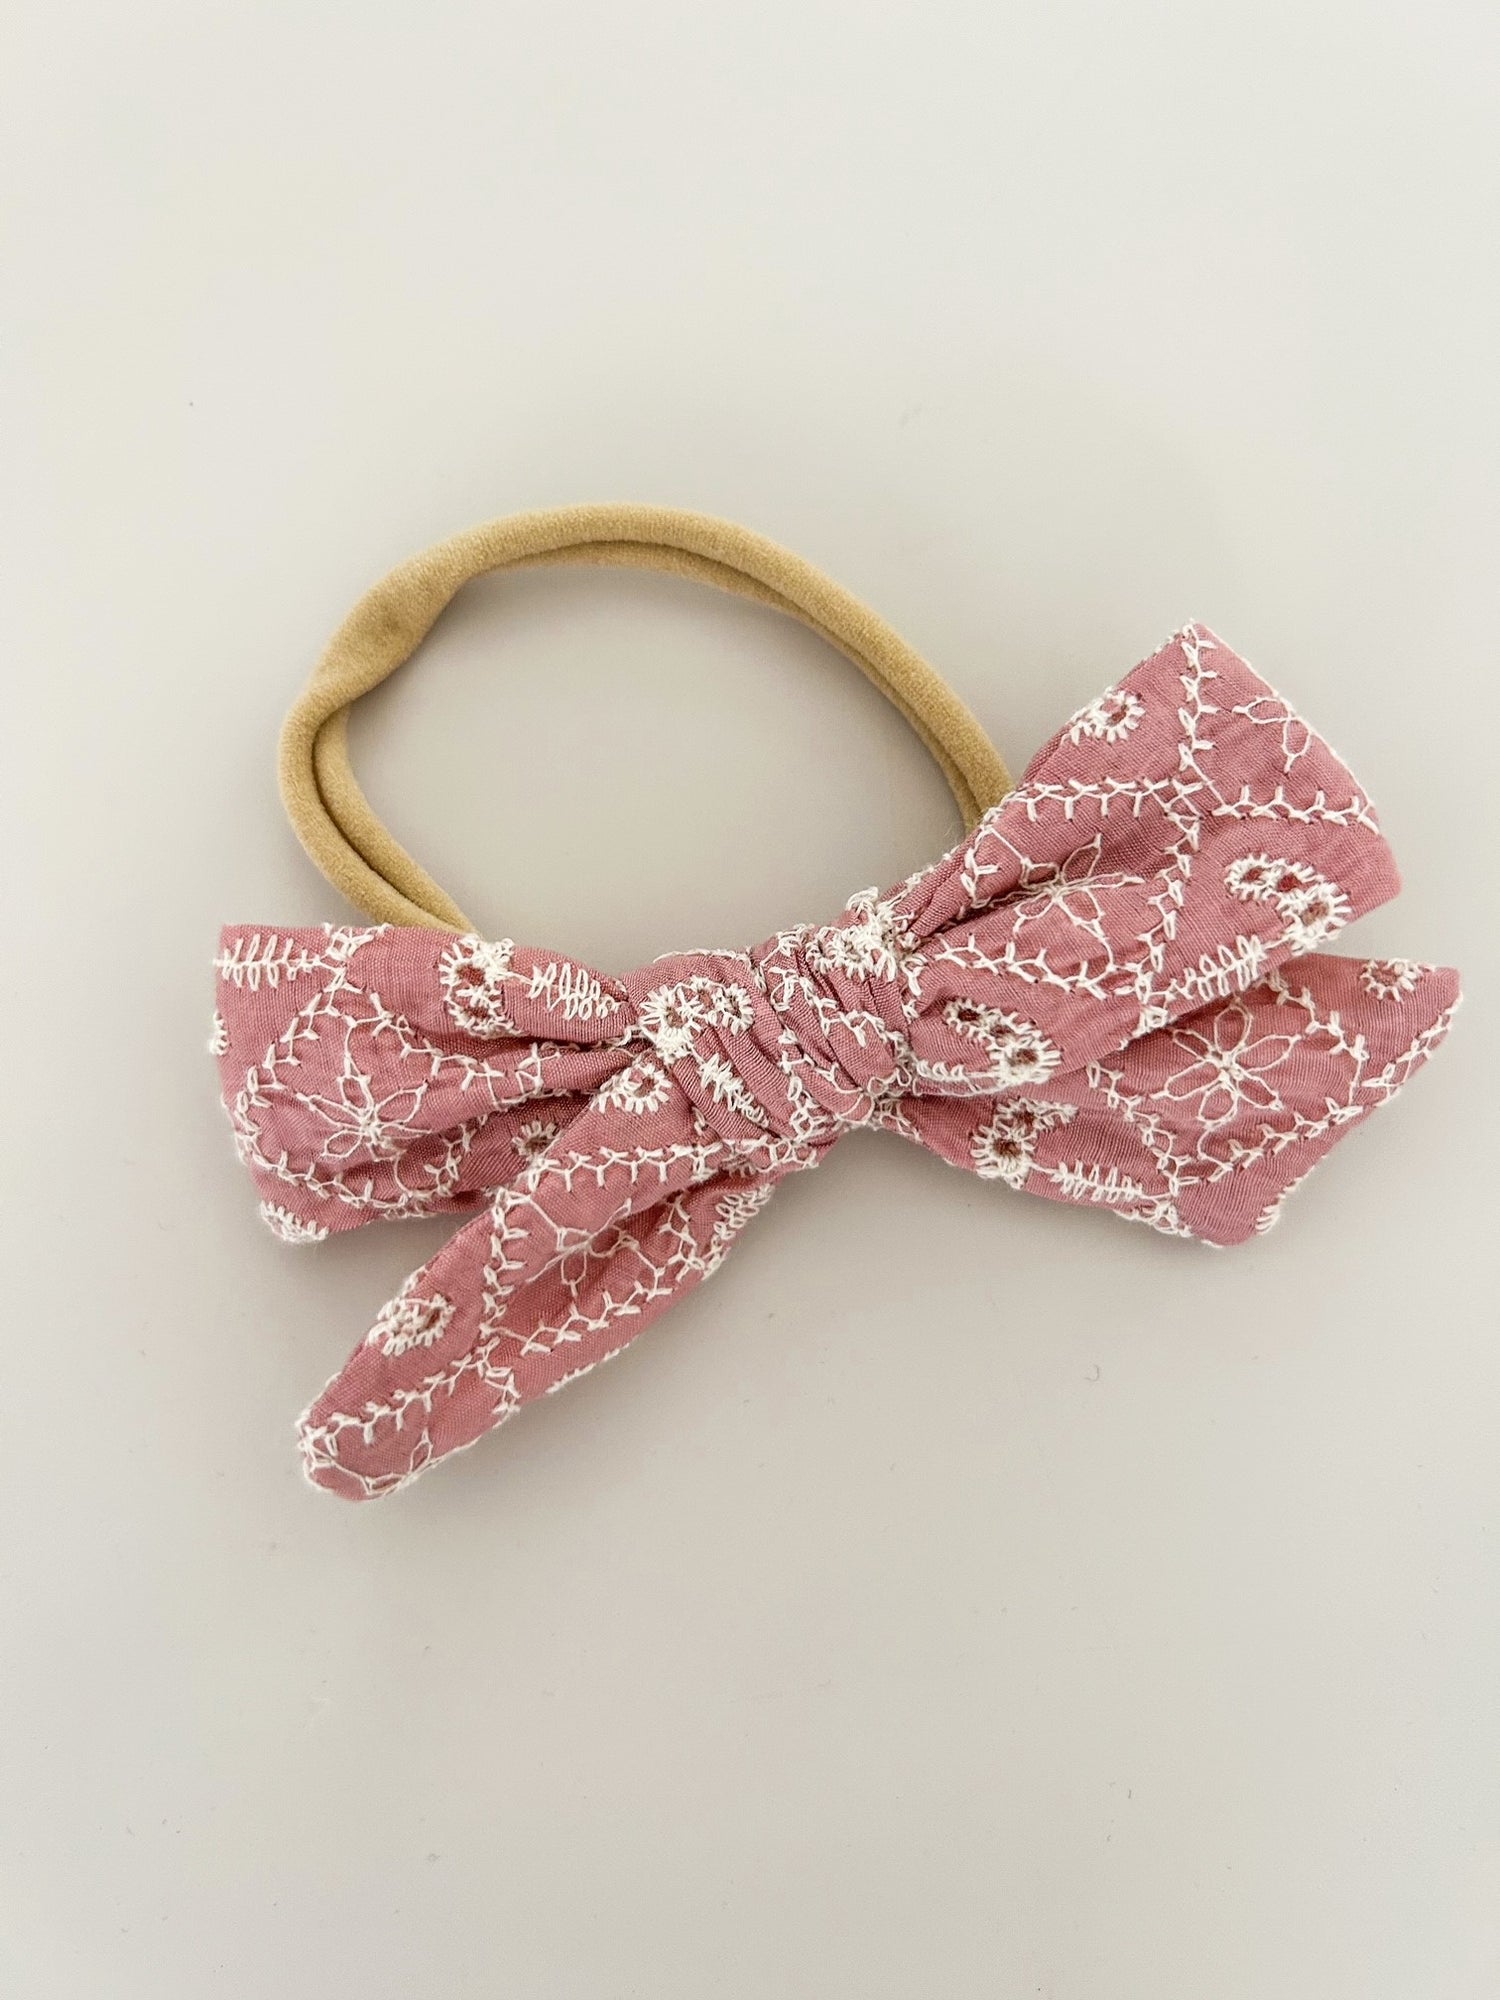 FLORAL EMBROIDERY BOW HEADBAND - DUSTY